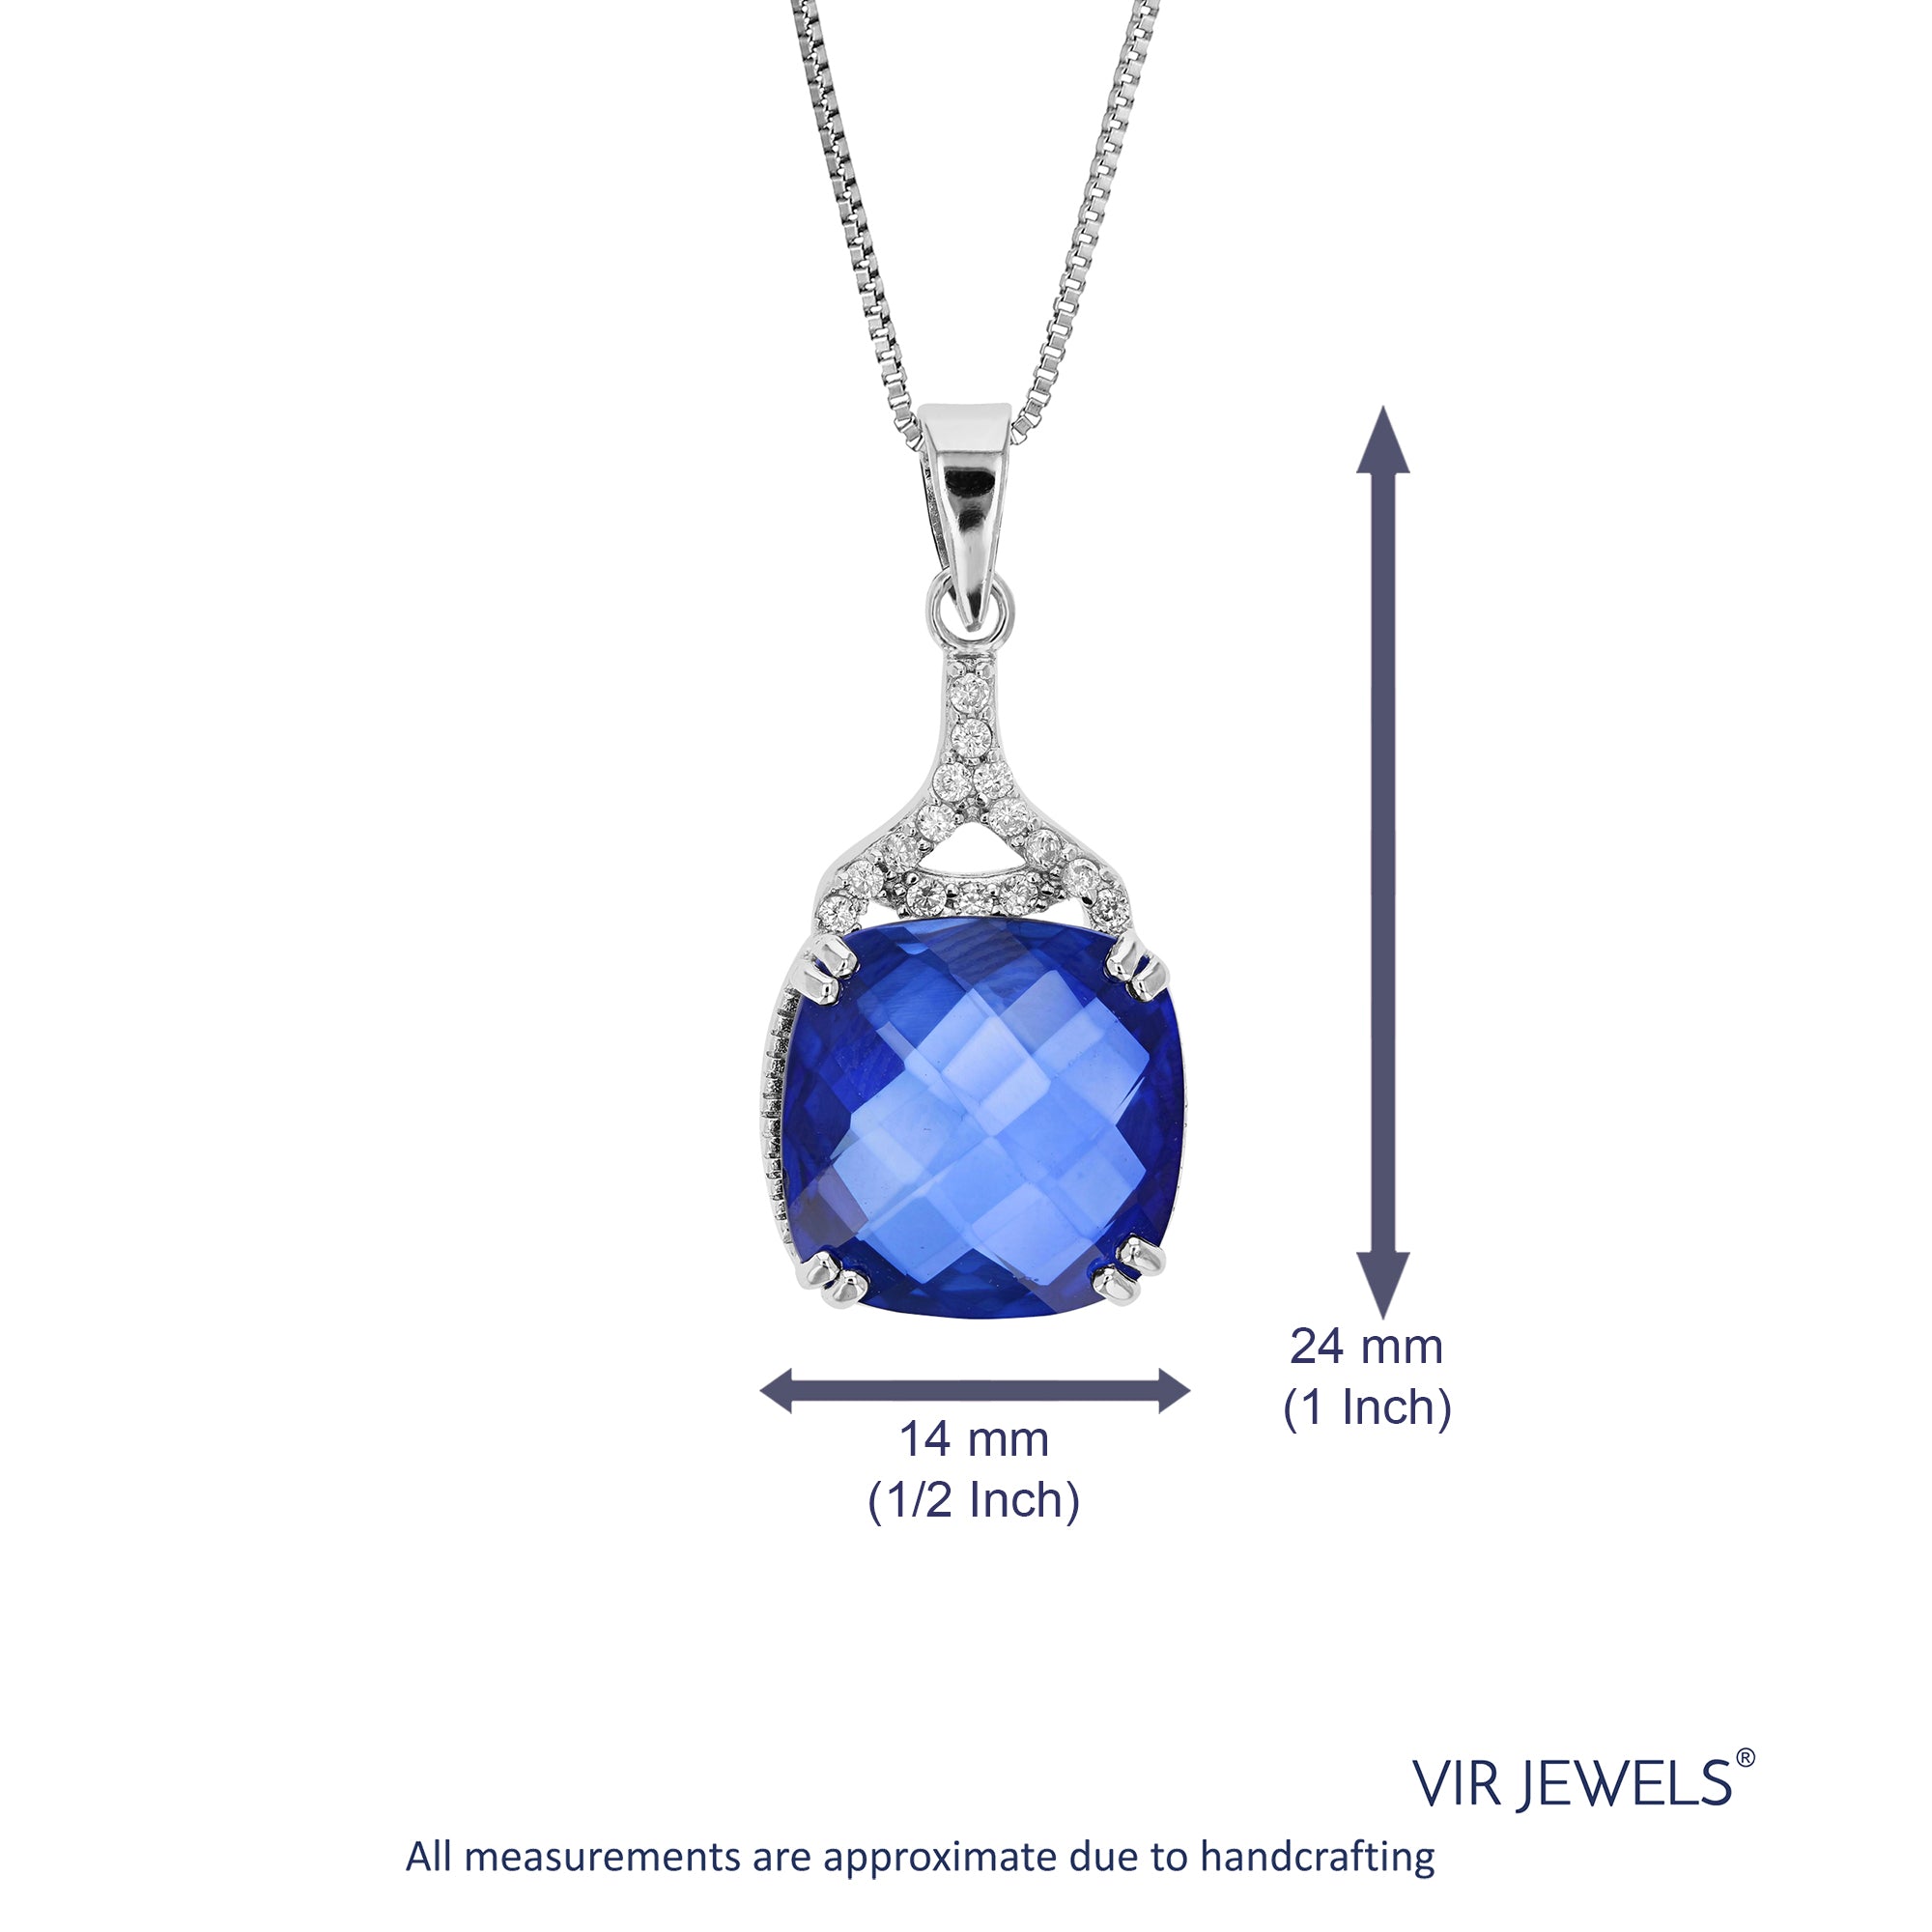 5.5 cttw Pendant Necklace, Created Sapphire Cushion Cut Pendant Necklace for Women in .925 Sterling Silver with 18 Inch Chain, Prong Setting